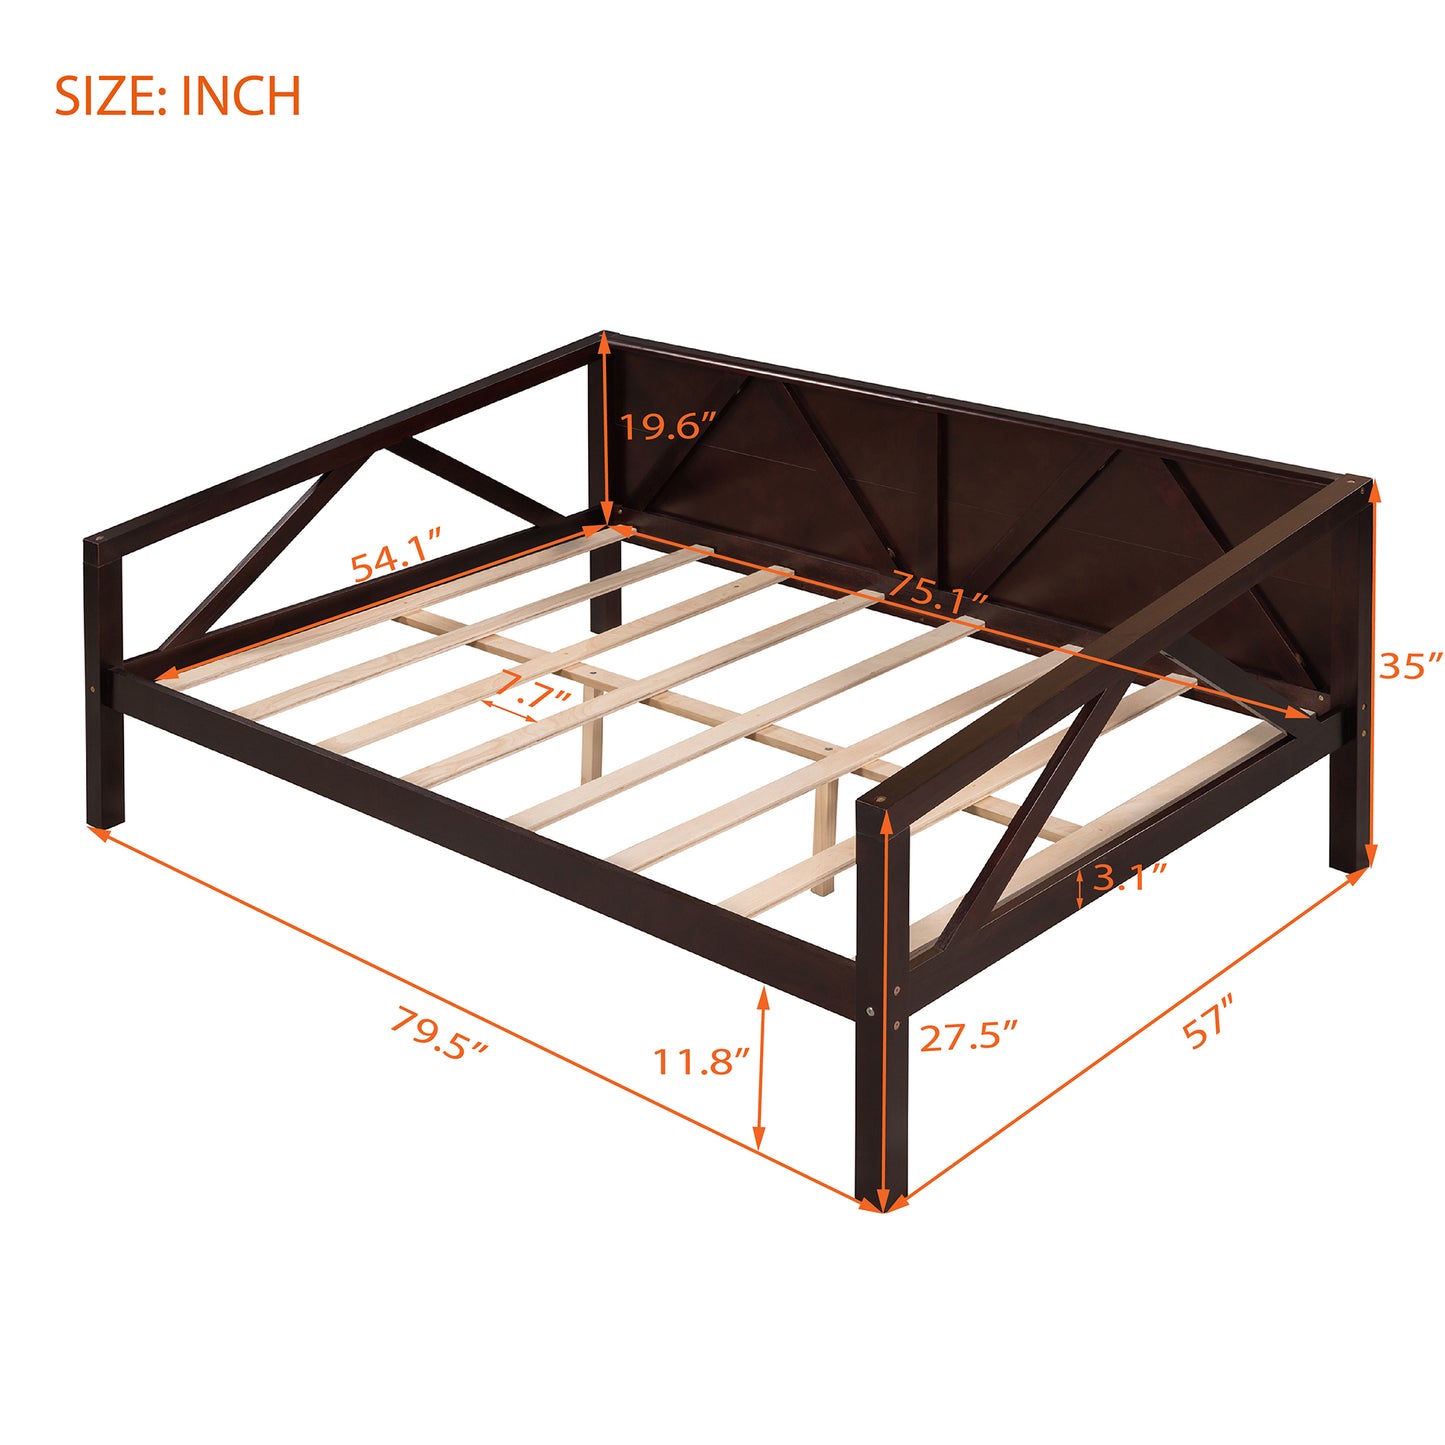 Full size Daybed, Wood Slat Support, Espresso